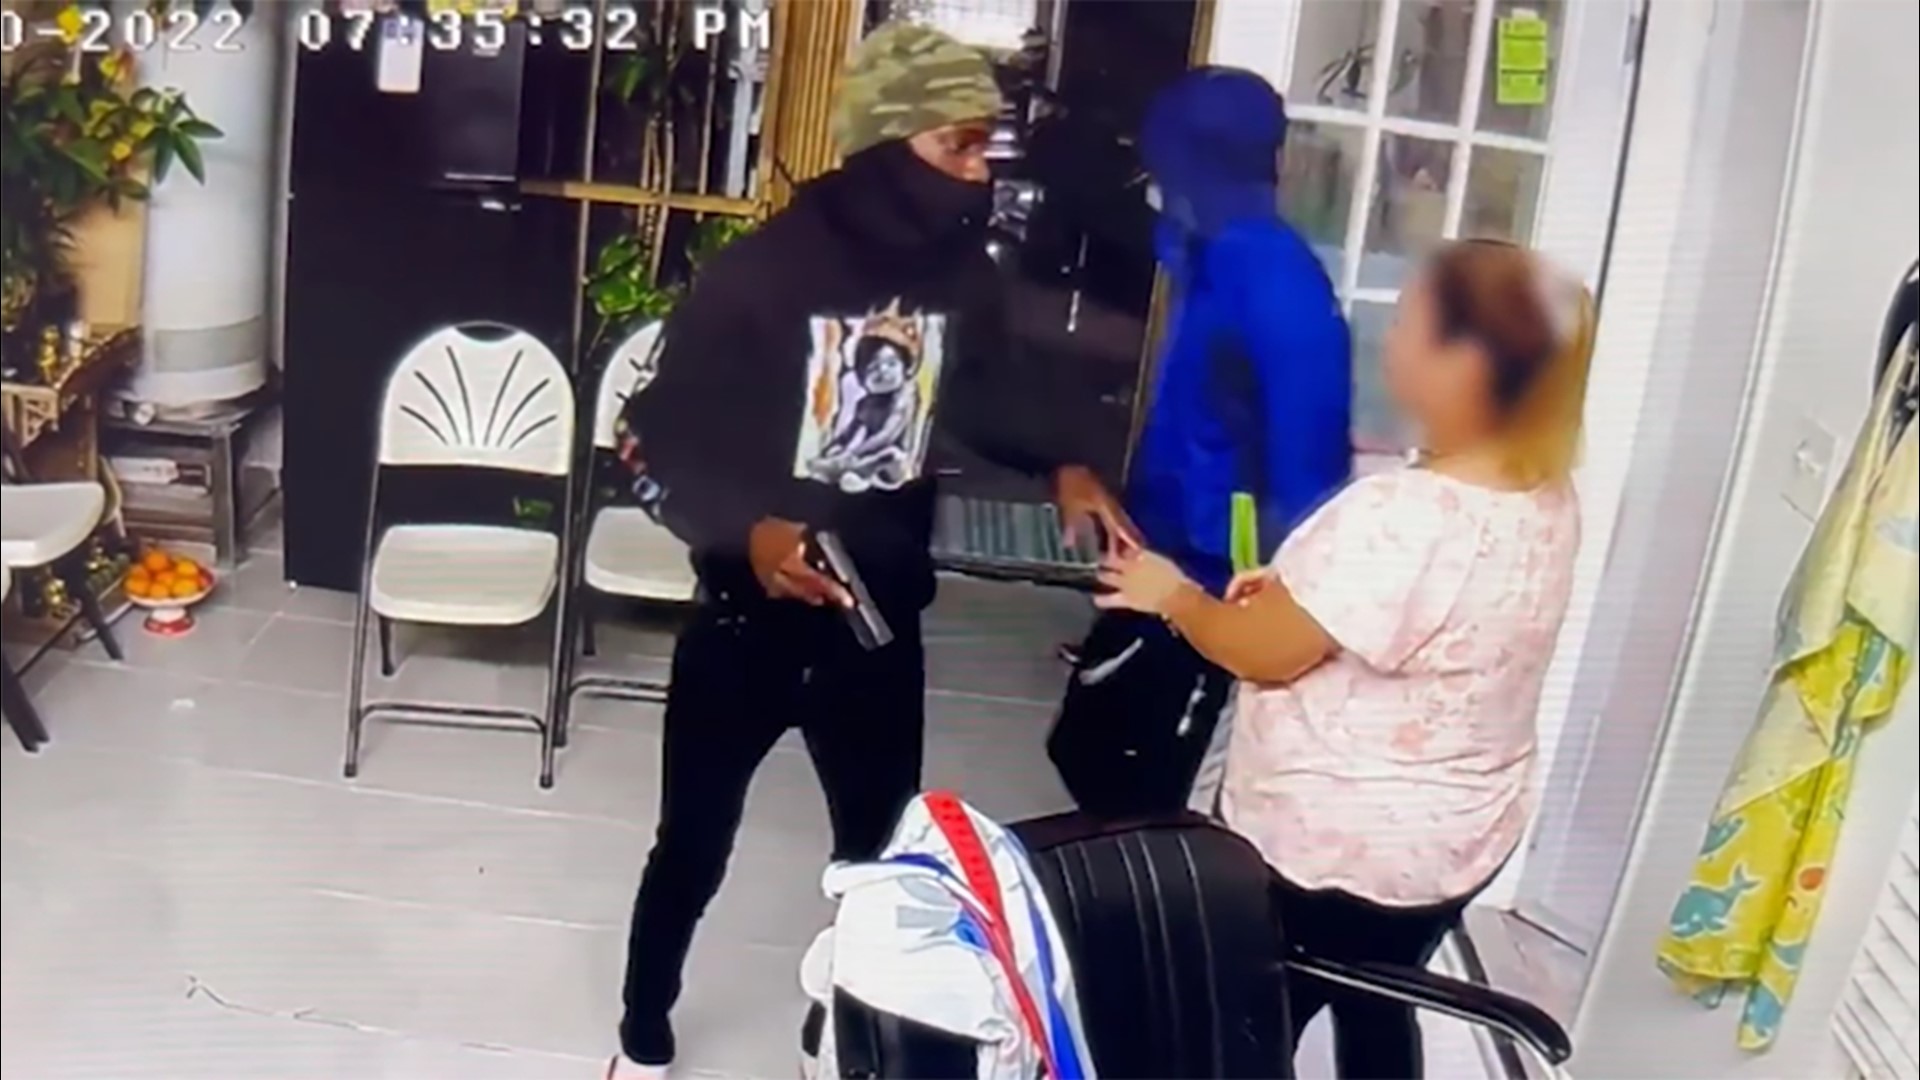 The Houston Police Department is asking for the public's help identifying the suspects seen on video robbing a woman at gunpoint in July 2022.